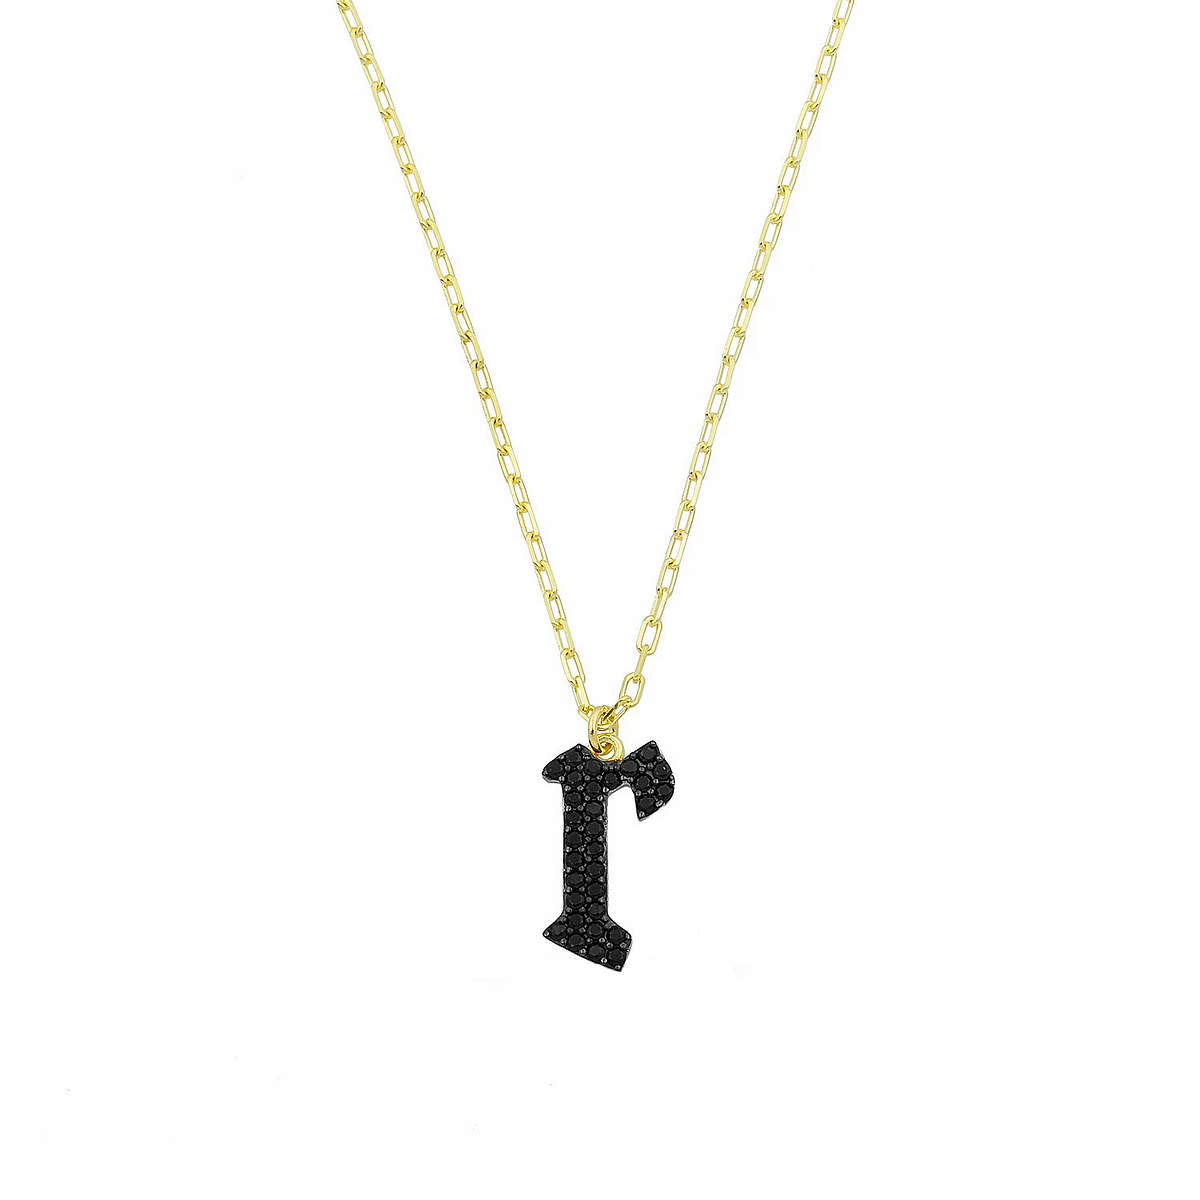 The Rockstar Pavé Letters Necklace in Onyx